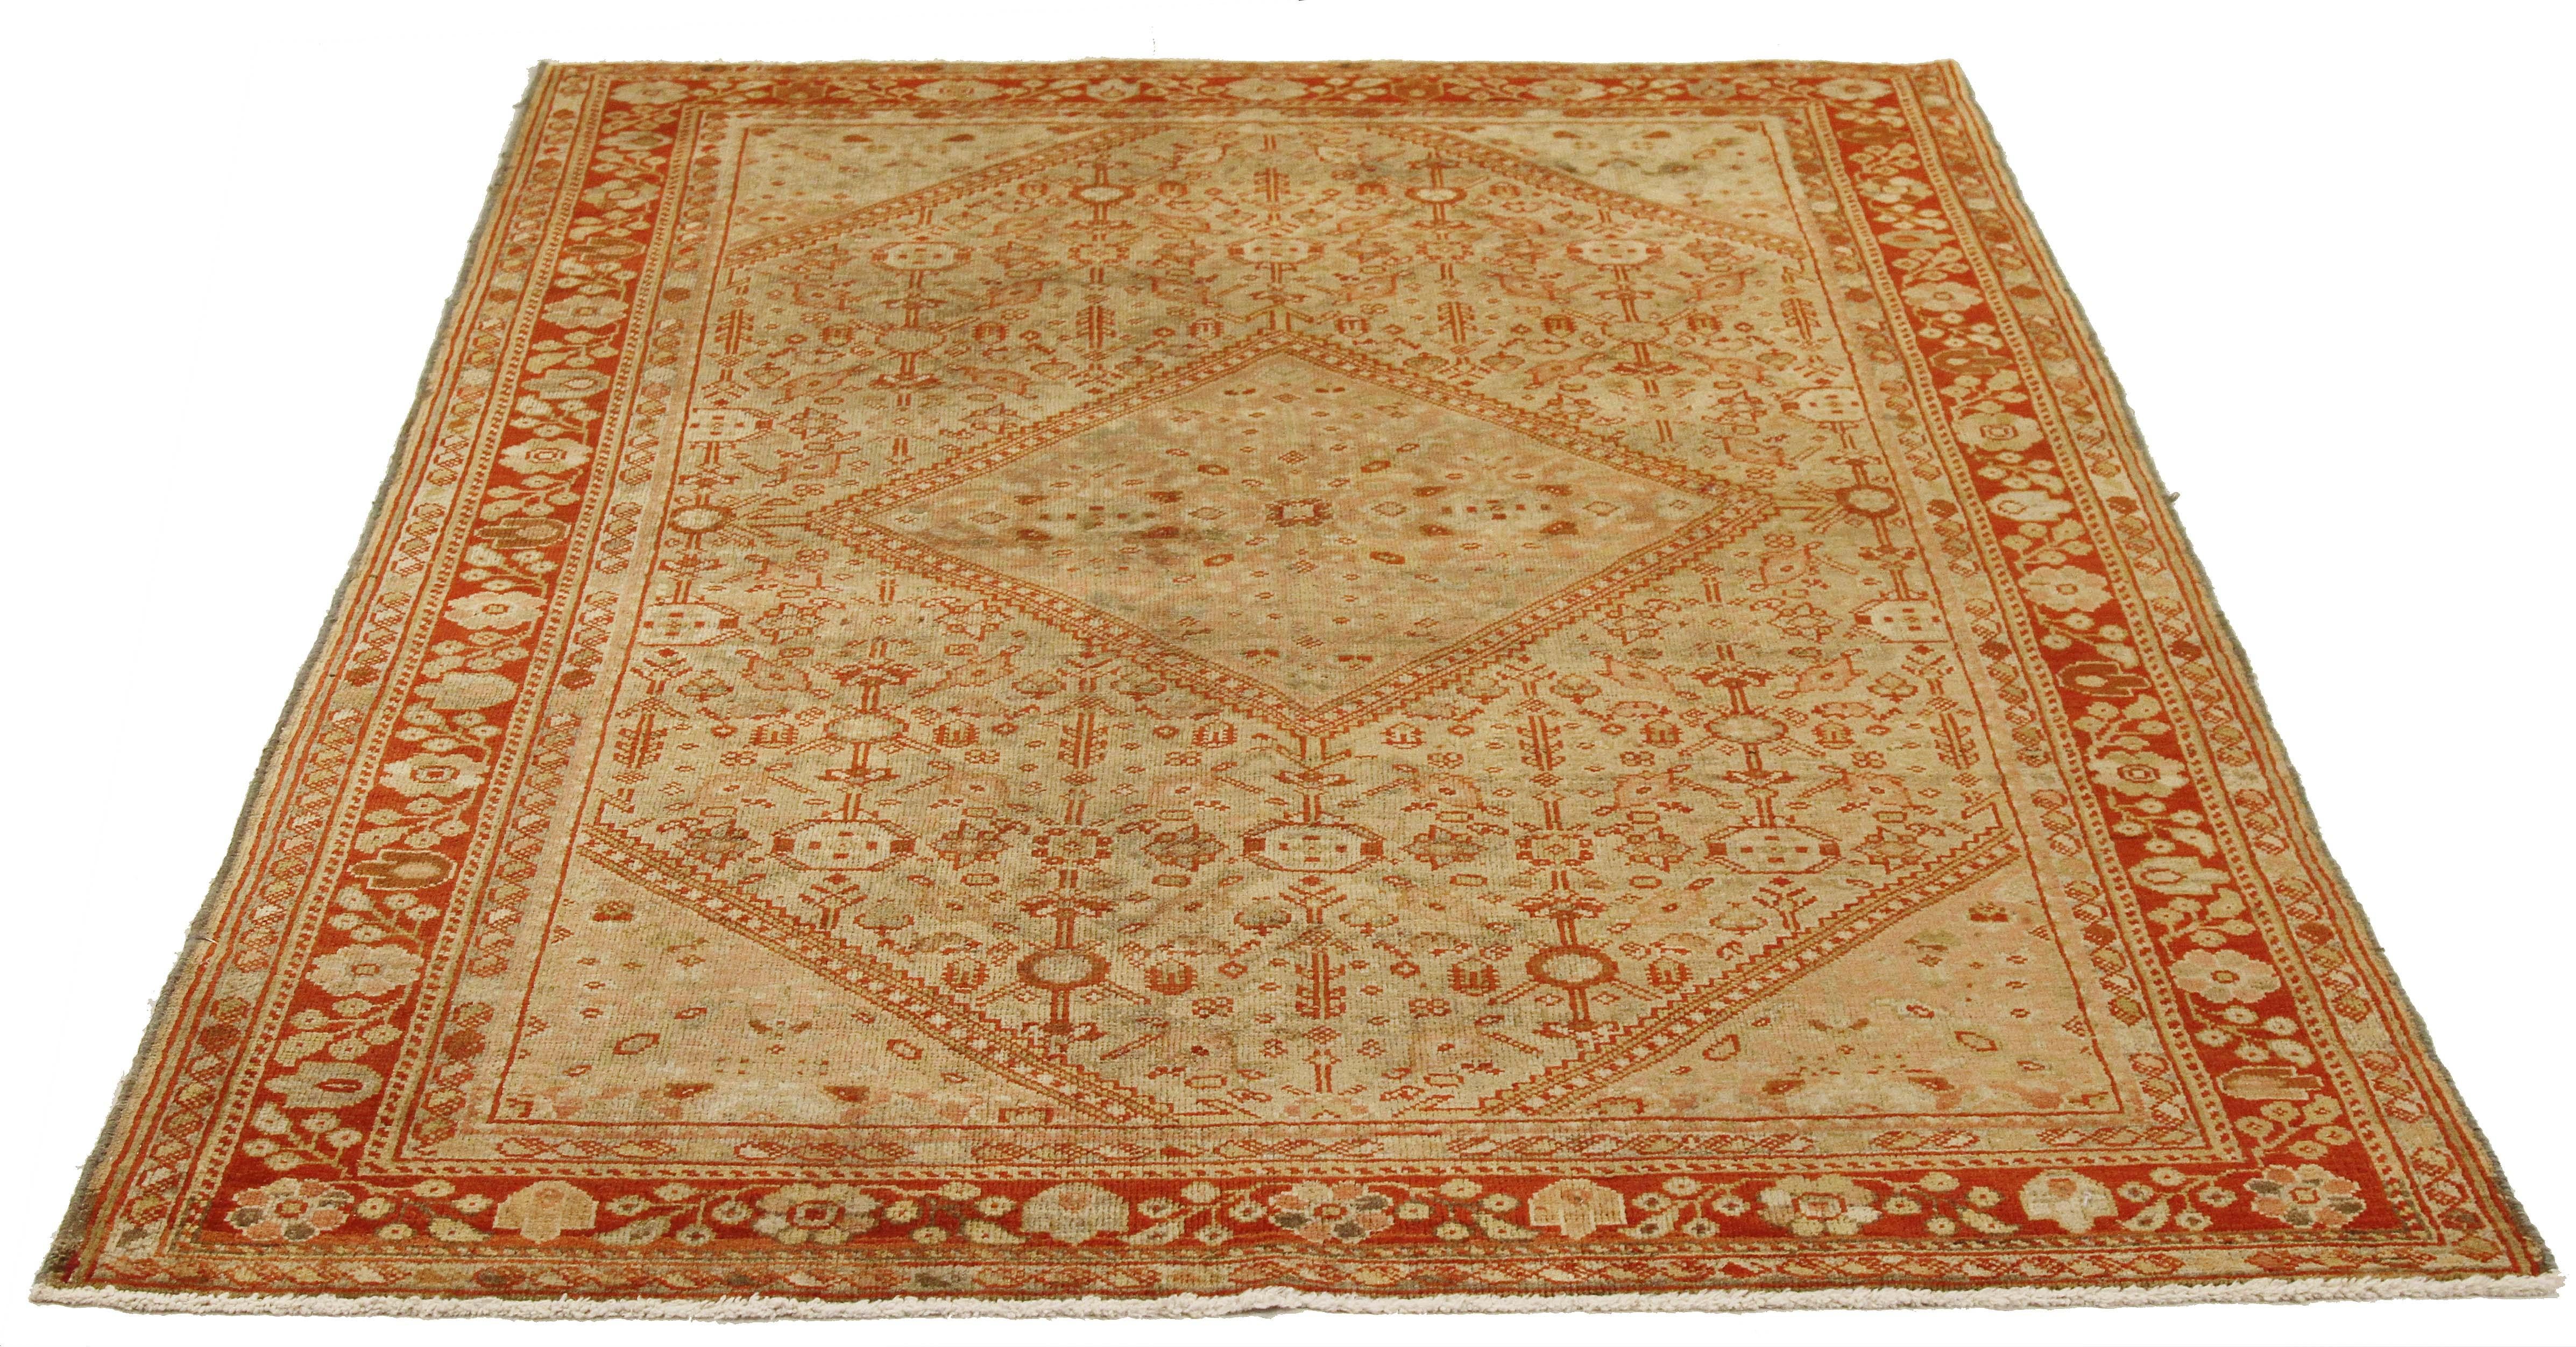 Antique Persian runner rug handwoven from the finest sheep’s wool and colored with all-natural vegetable dyes that are safe for humans and pets. It’s a traditional Meshkabad design featuring a big diamond floral medallion in red and beige over an